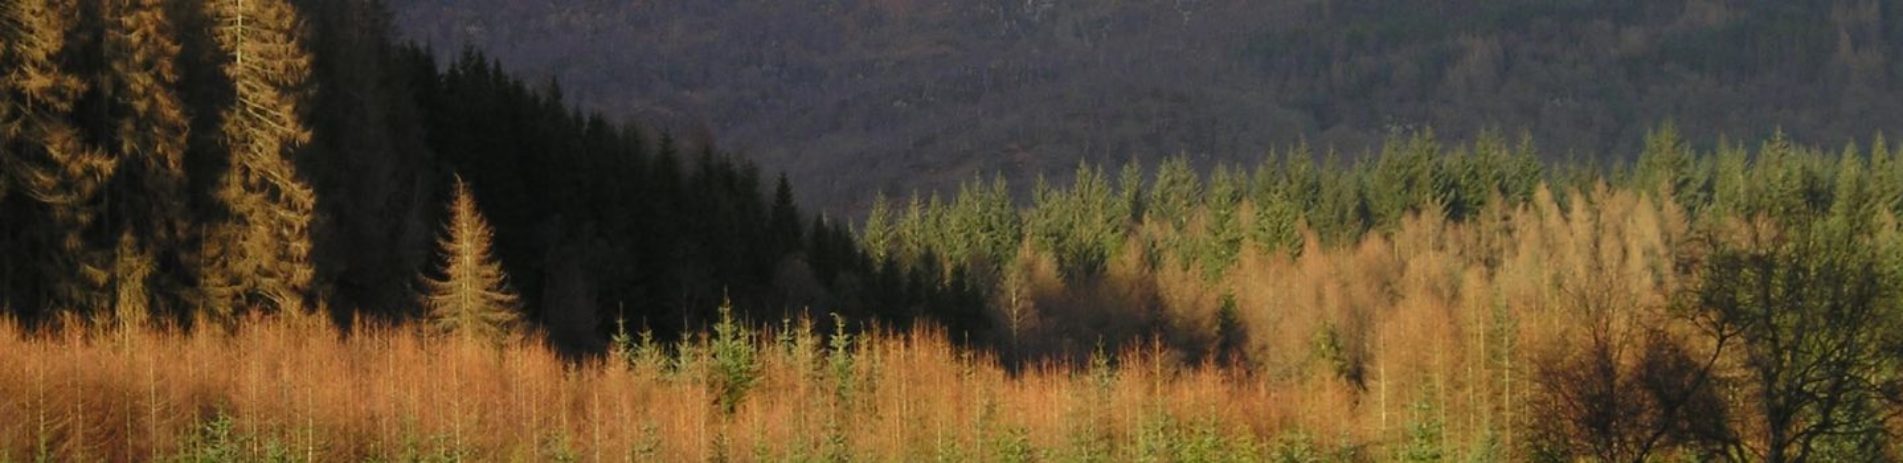 forest-plantations-especially-larch-in-beautiful-autumn-colours-in-sunshine